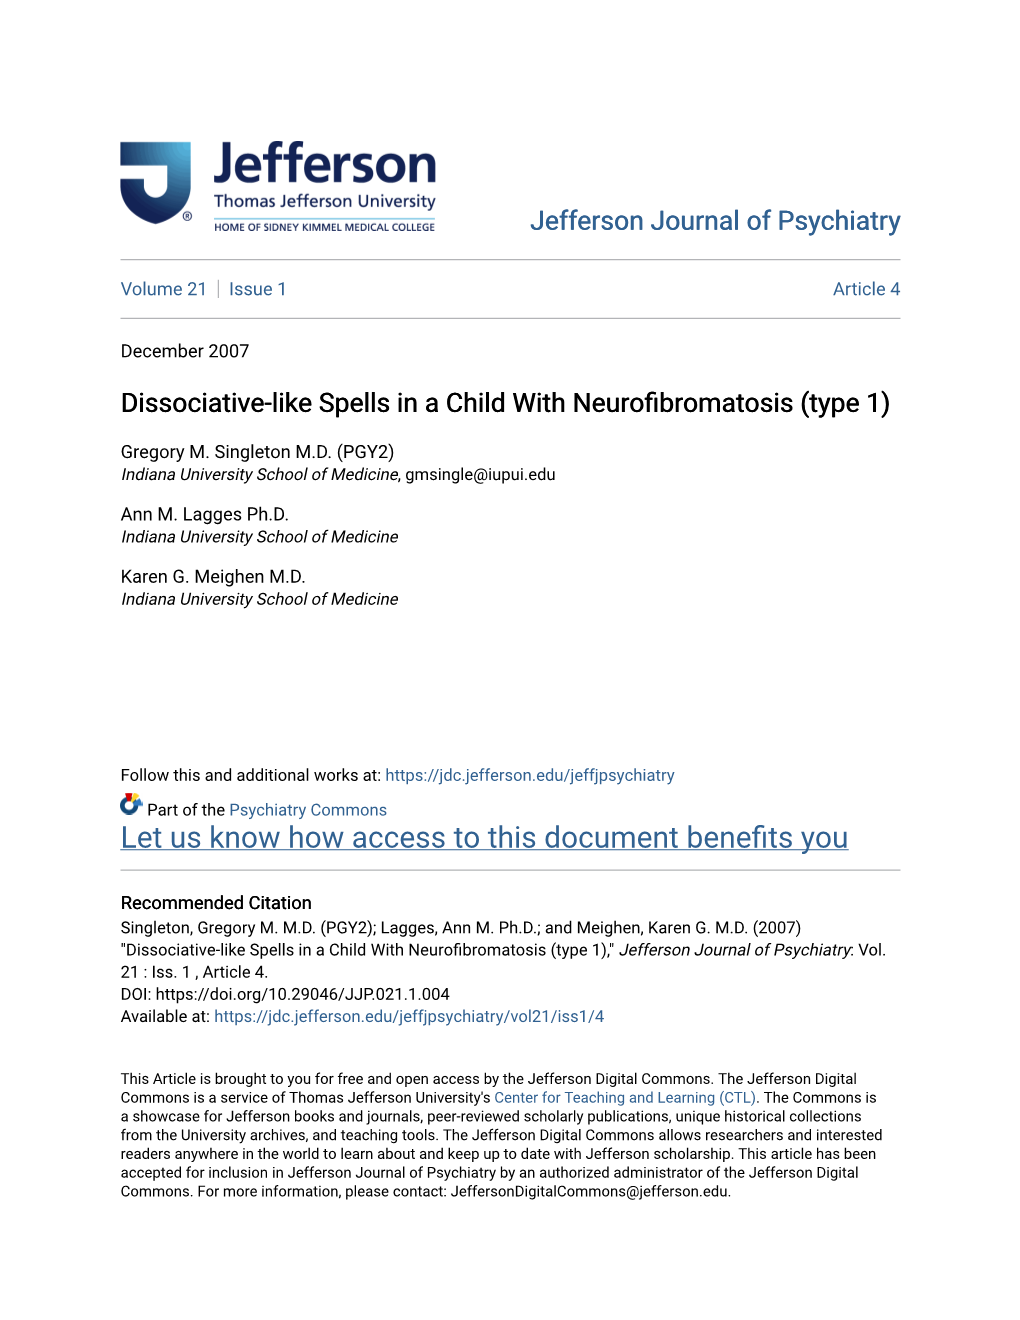 Dissociative-Like Spells in a Child with Neurofibromatosis (Type 1)